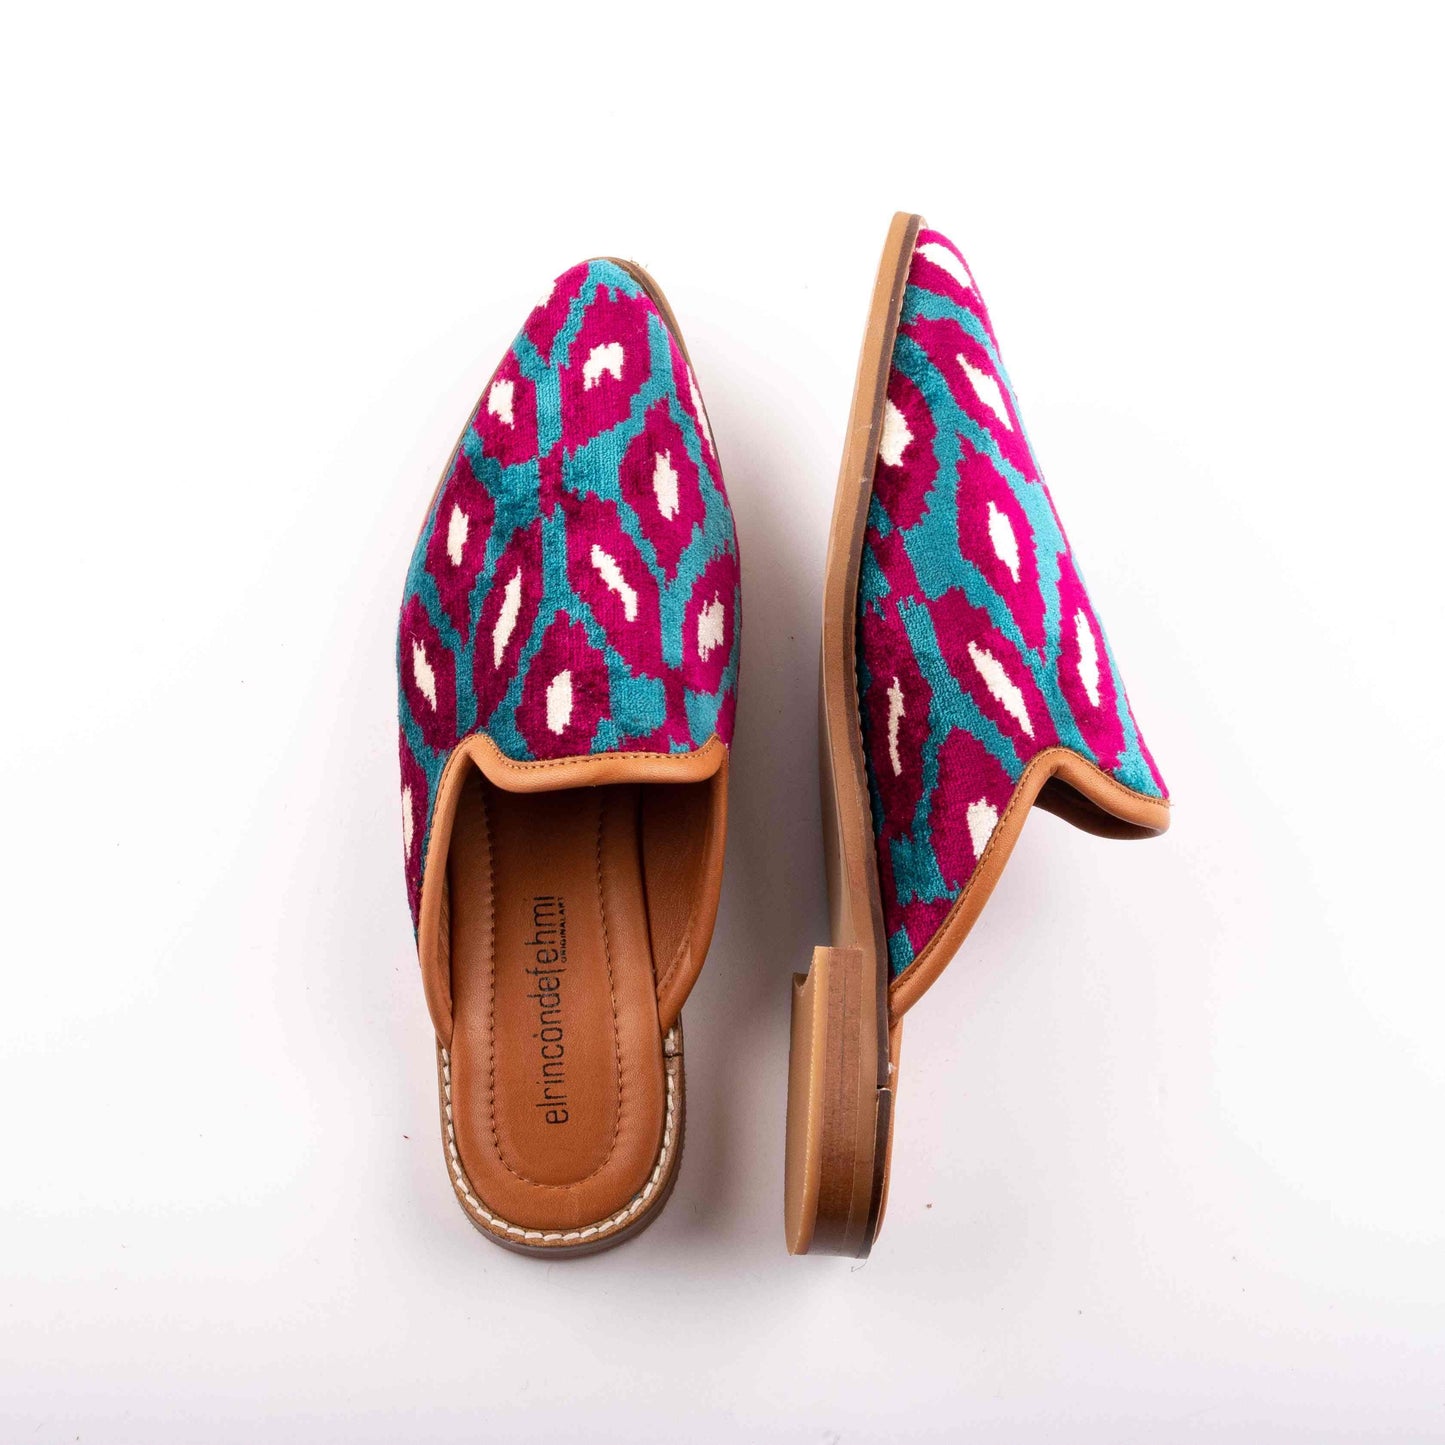 Ethnic Woman Pointed Toe Slipper Crafted From Handmade Velvet and Real Leather Size 6.5  Base Width: 8 cm - Base Length: 26.5 cm - Heel:1.5 cm